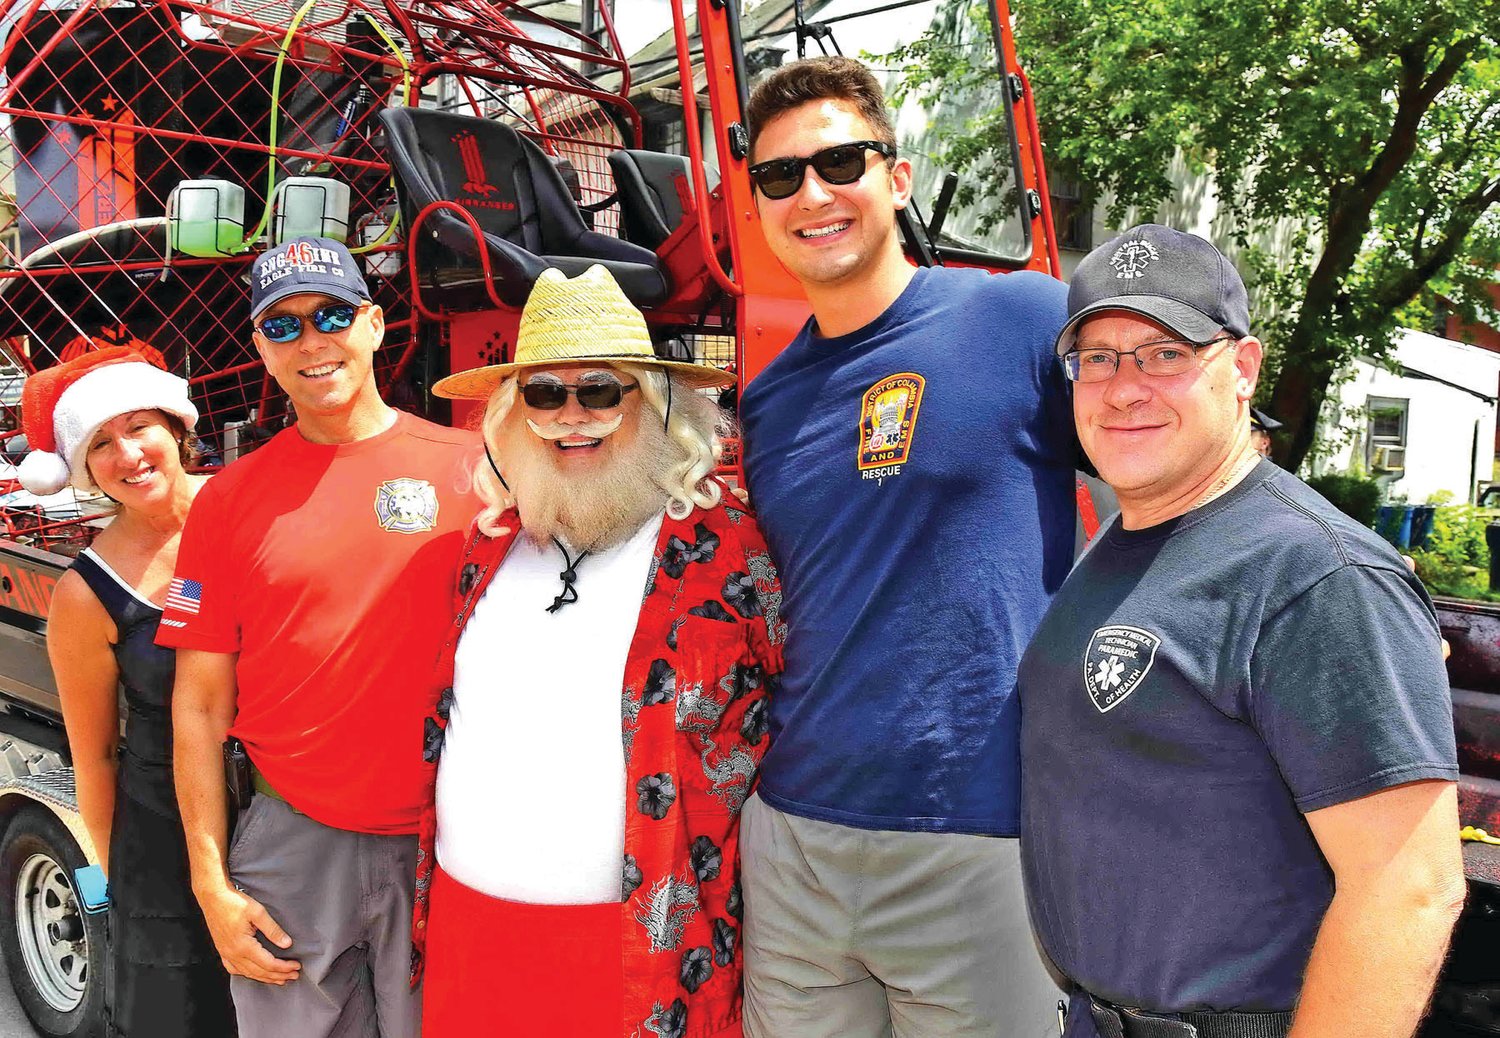 Cindy Hall, executive director of the New Hope Historical Society, with members of the Eagle Fire Co. and Rescue Squad and Santa (in summer attire).